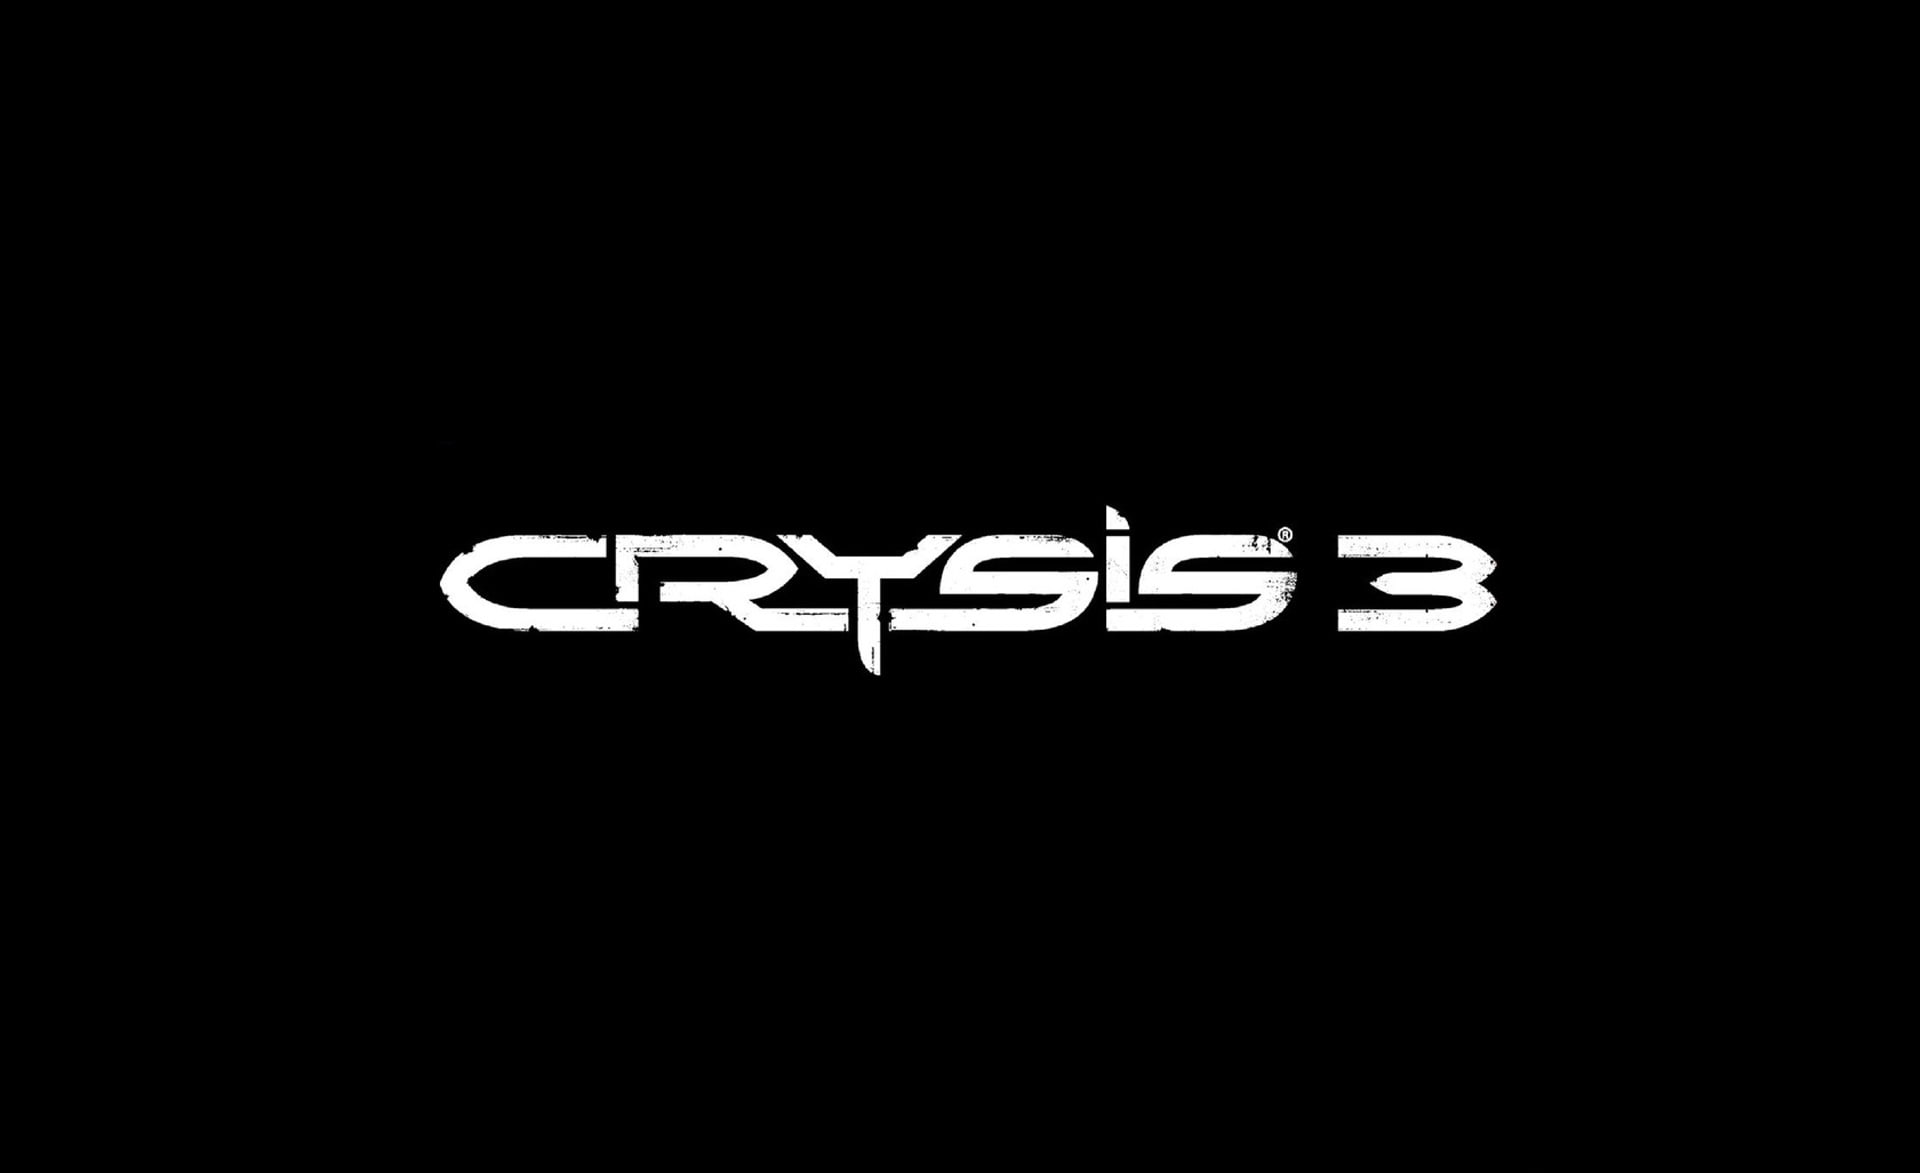 Crysis 3, Crysis 3 logo, Games, Background, text, western script